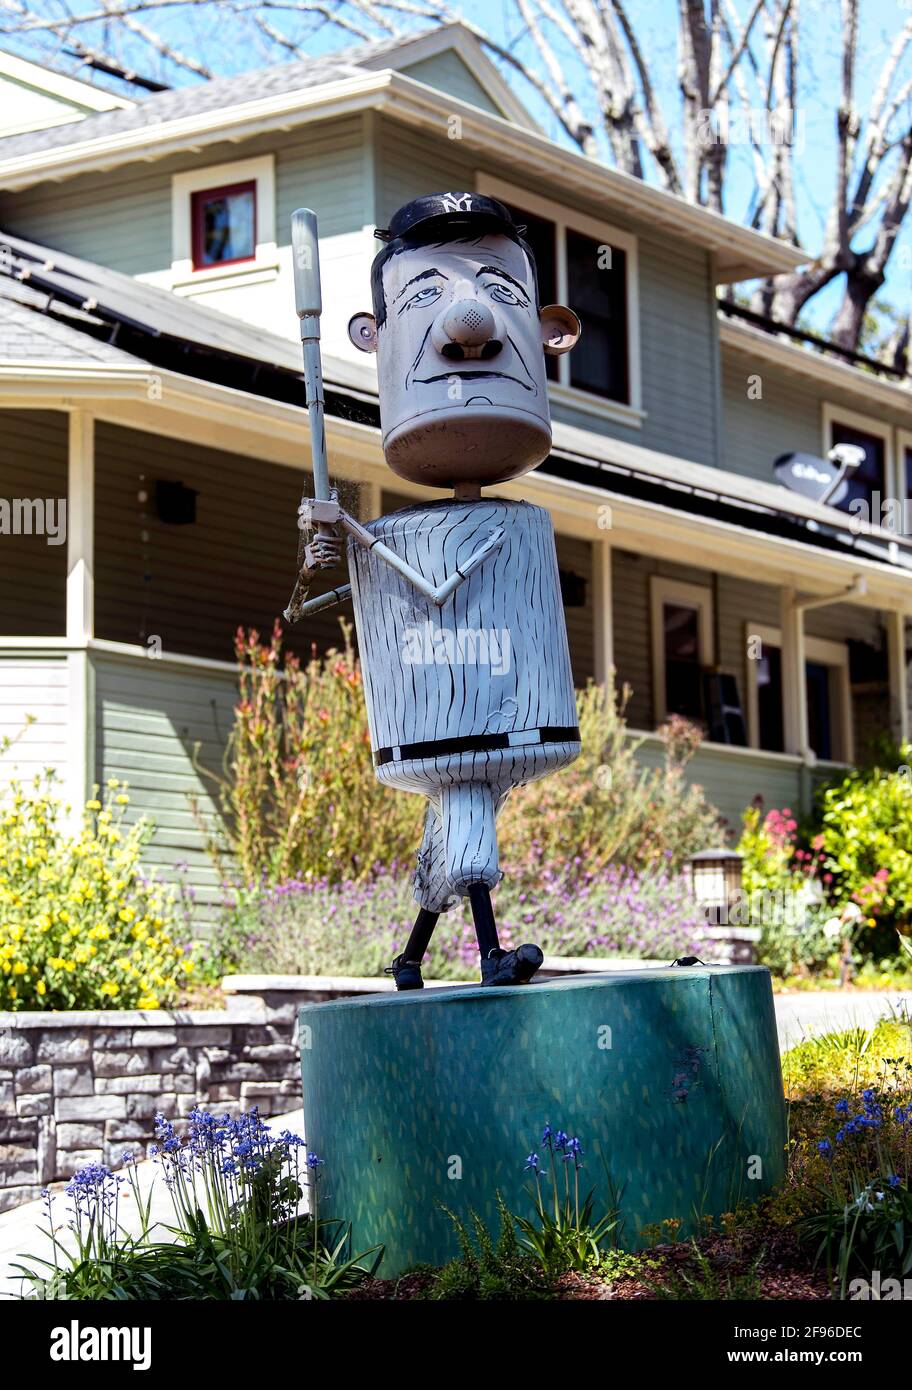 Sebastopol, California, USA. 16th Apr, 2021. The junk art assemblages from Patrick Amiot and Brigette Laurent make their front yard and those of their neighbors on Florence Avenue an open air gallery of visual art. There are several dozen sculptures on Florence Avenue and several hundred more scattered about in the town of Sebastopol some 50 miles north of San Francisco. Credit: Brian Cahn/ZUMA Wire/Alamy Live News Stock Photo